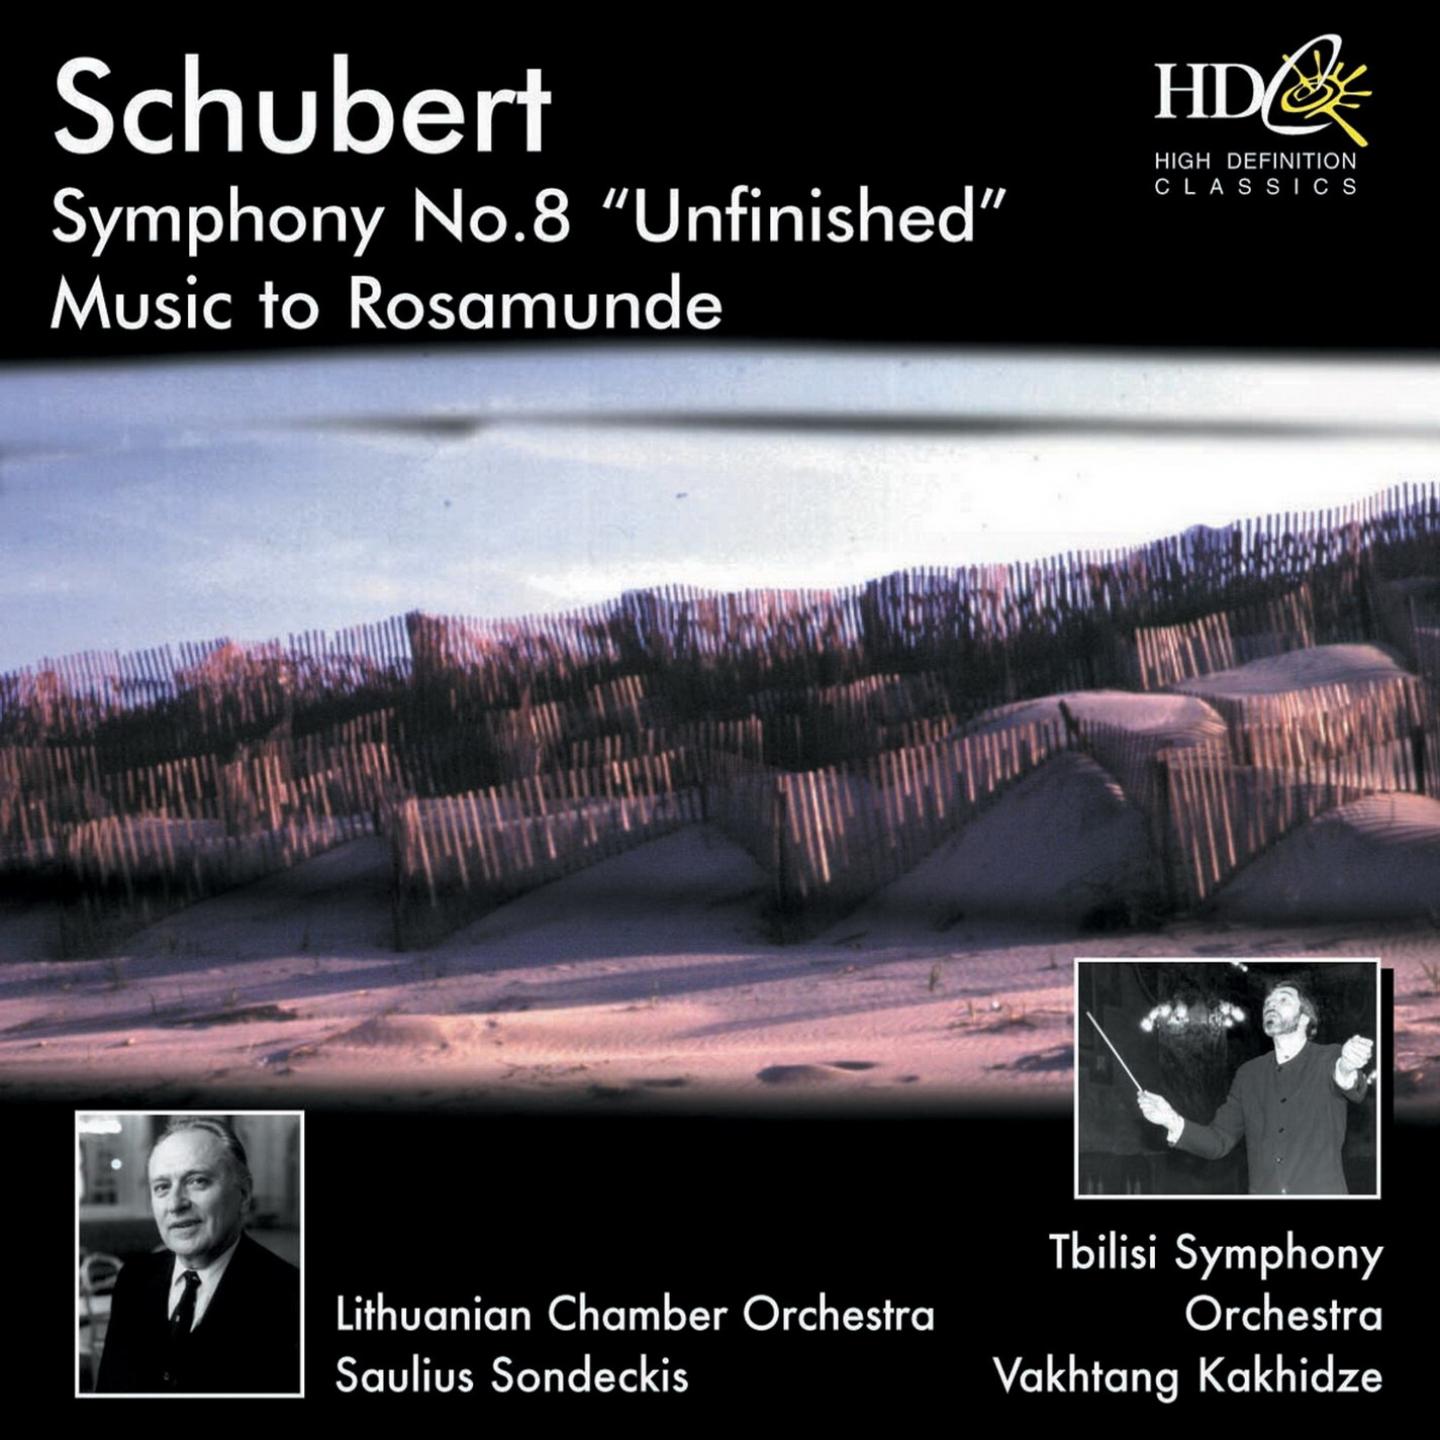 Symphony No.8 in B Minor, Unfinished, D.759; Music to Rosamunde, D.797, Op.26